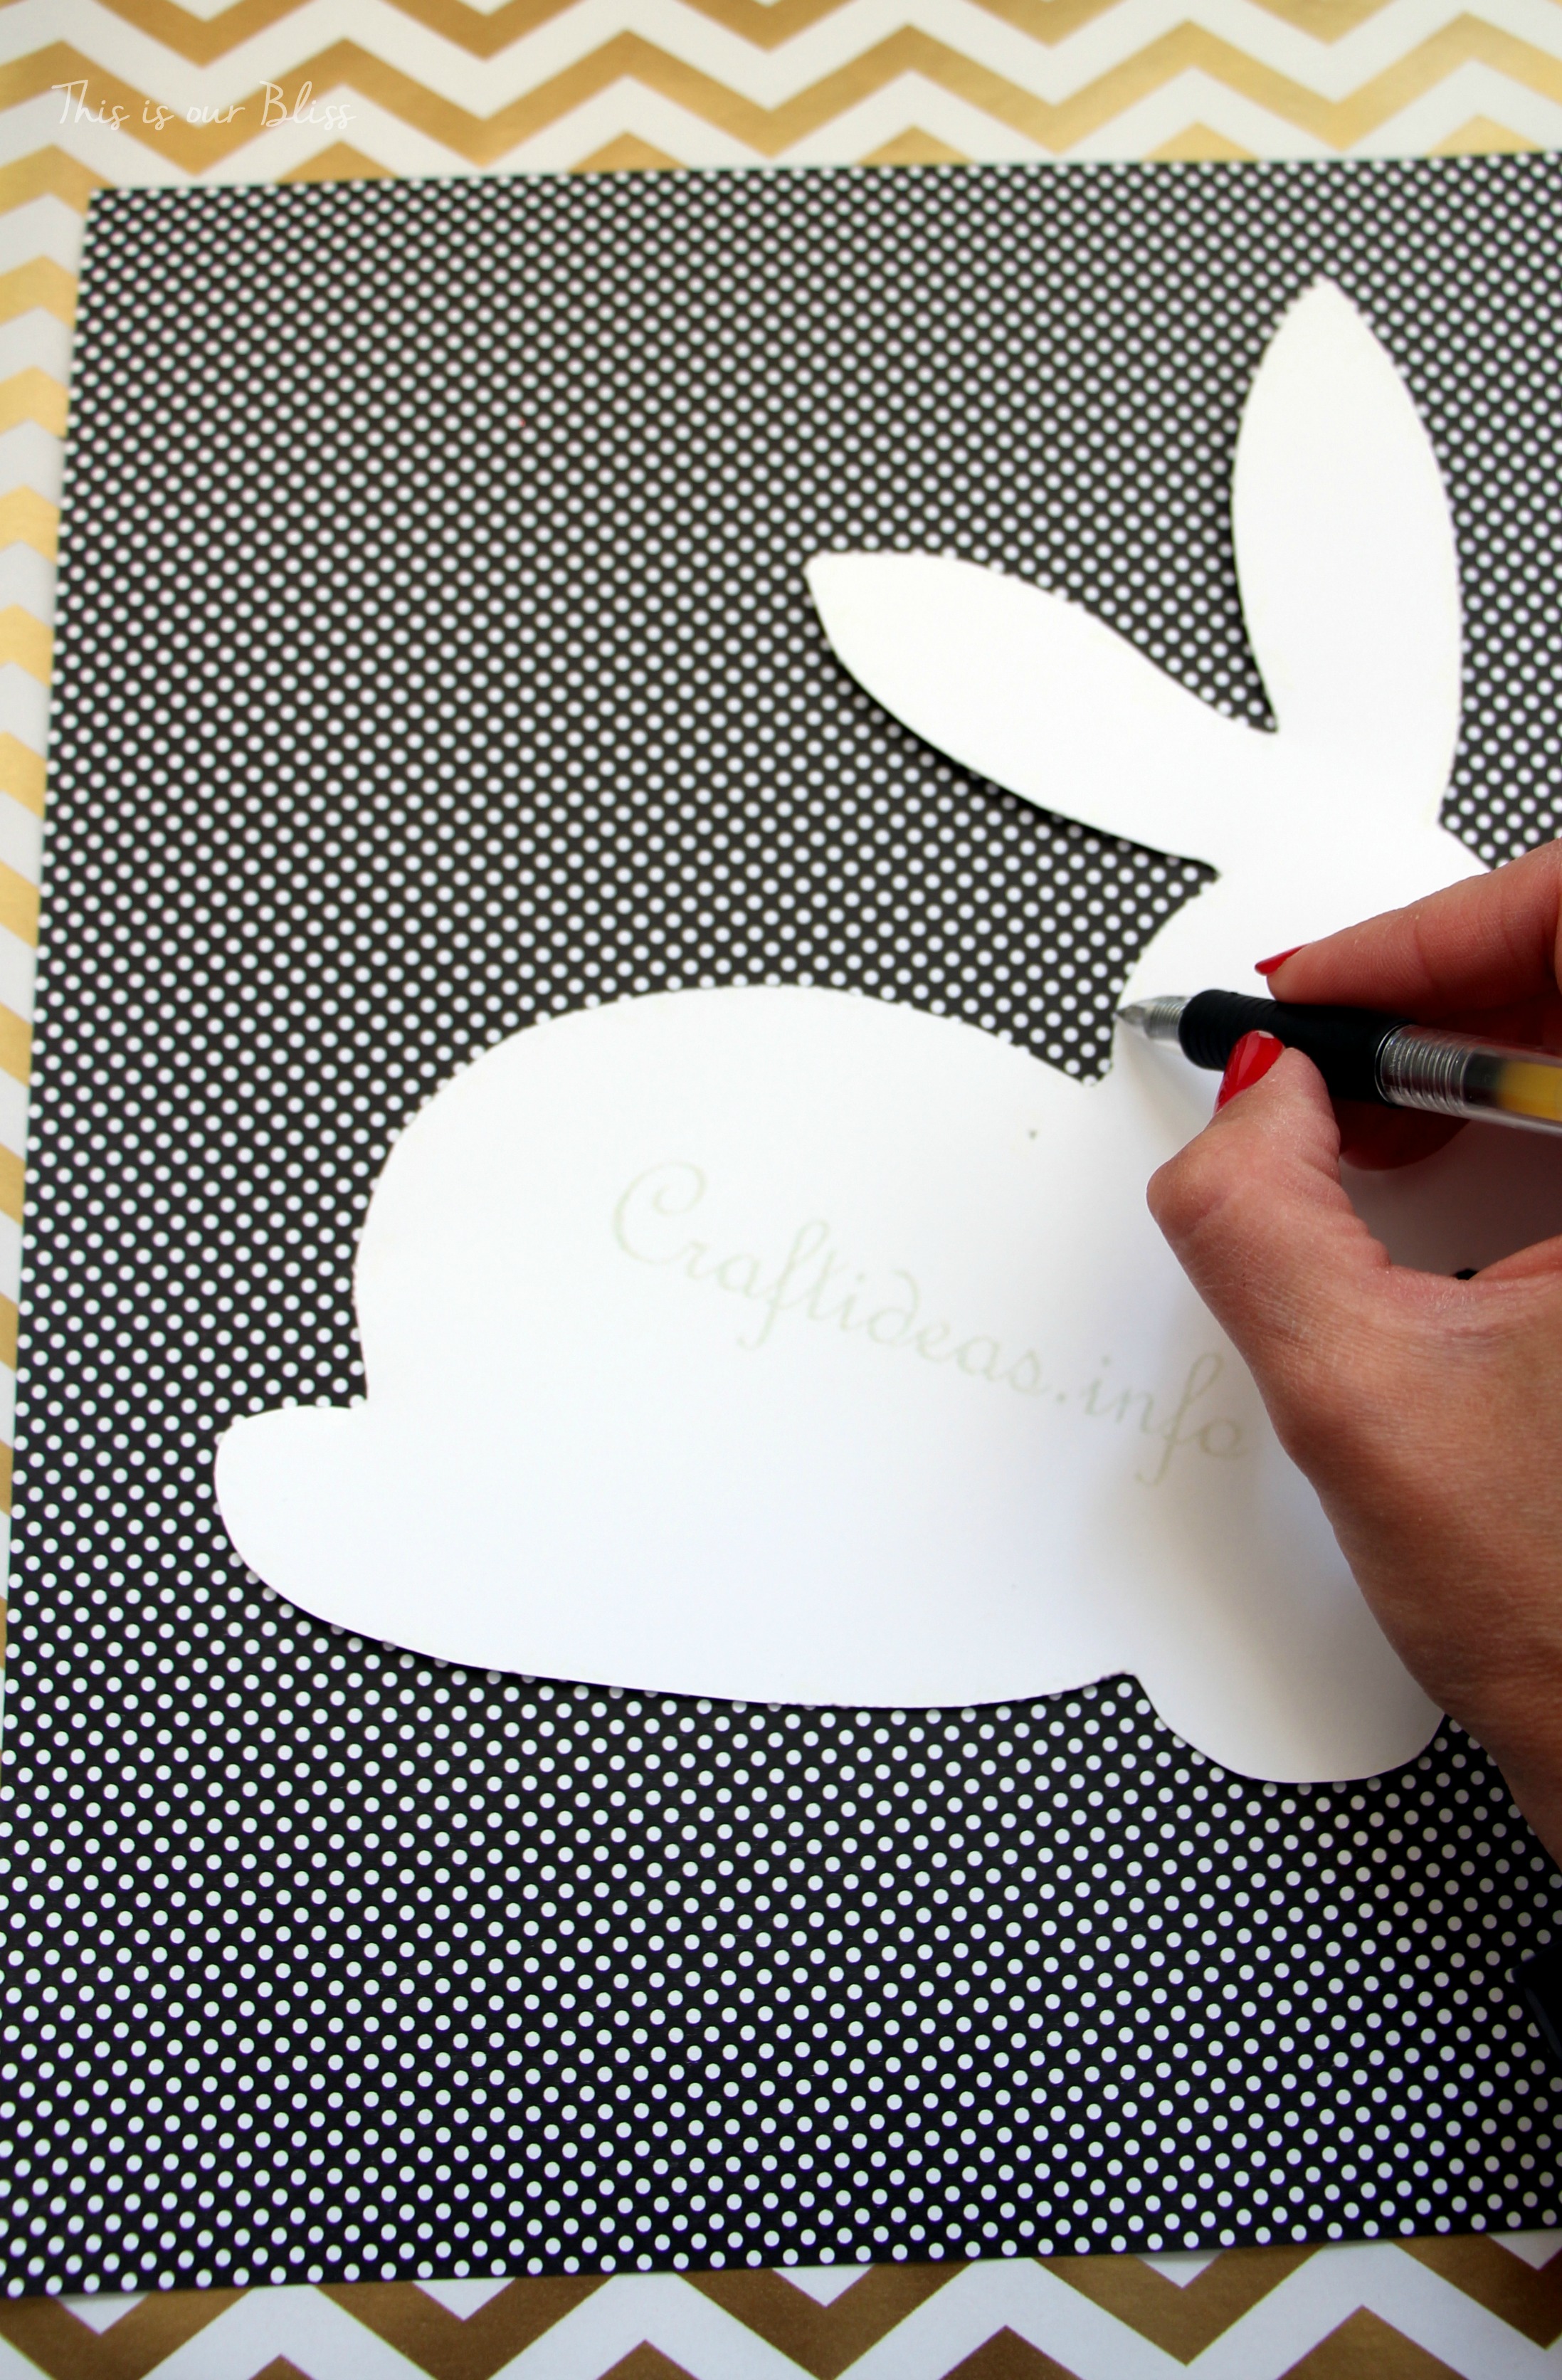 Bunny printable - trace onto paper - cut out to use as a stencil - Chic Easter art - black white and gold - polka dot gold foil - This is our Bliss